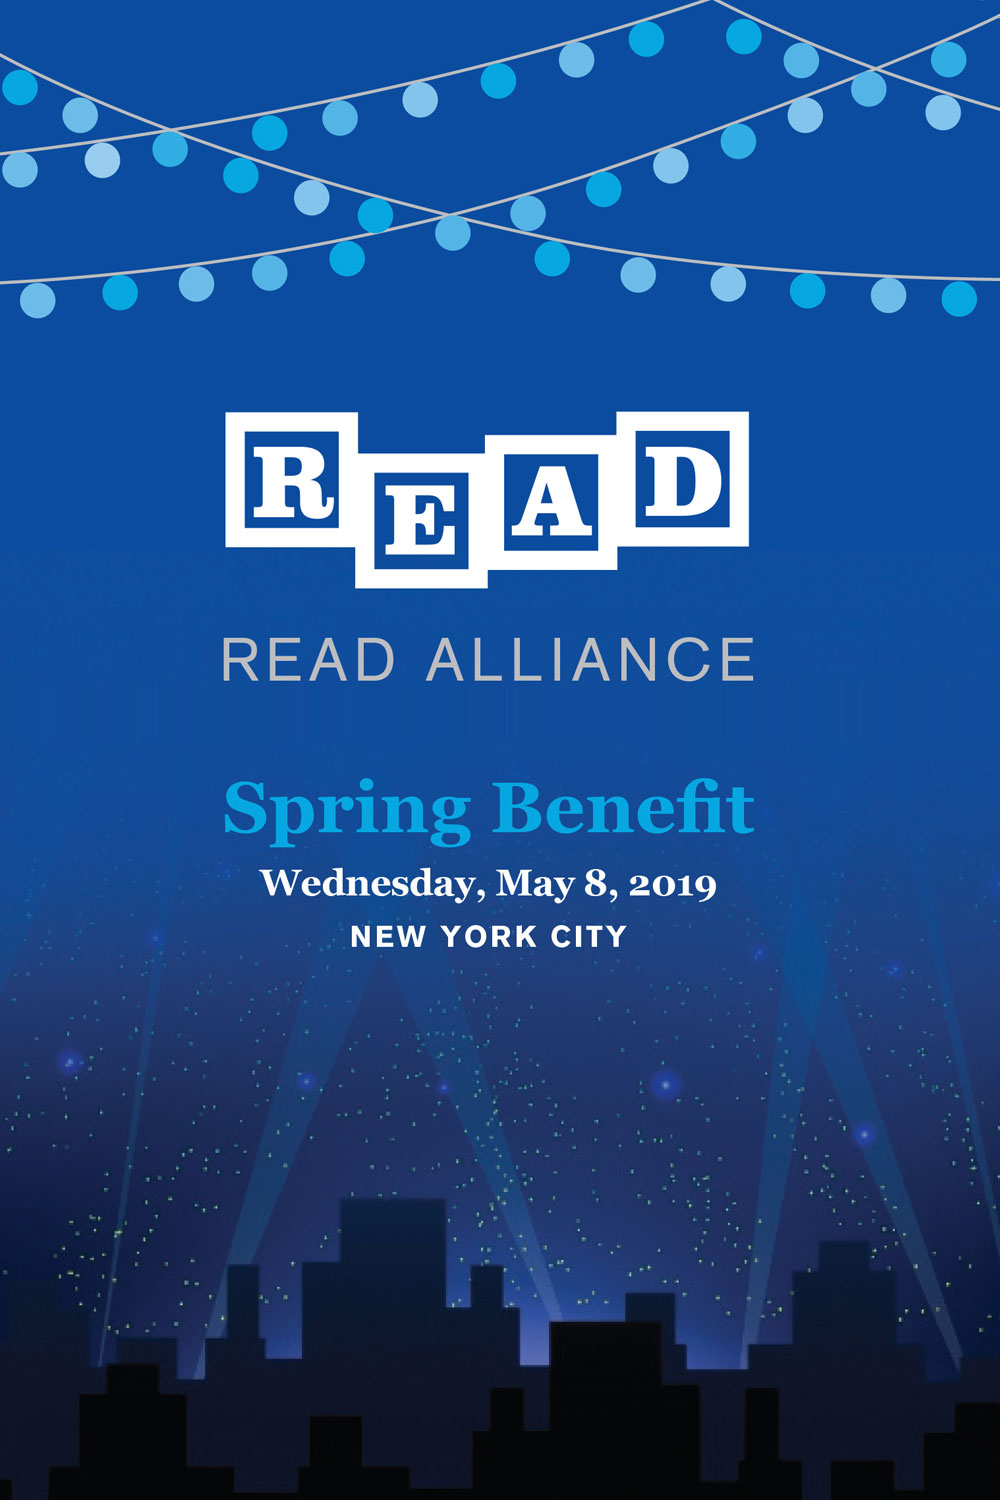 CLIENT:Read Alliance

DATE:May 2019

PROJECT:Invitation for Spring benefit